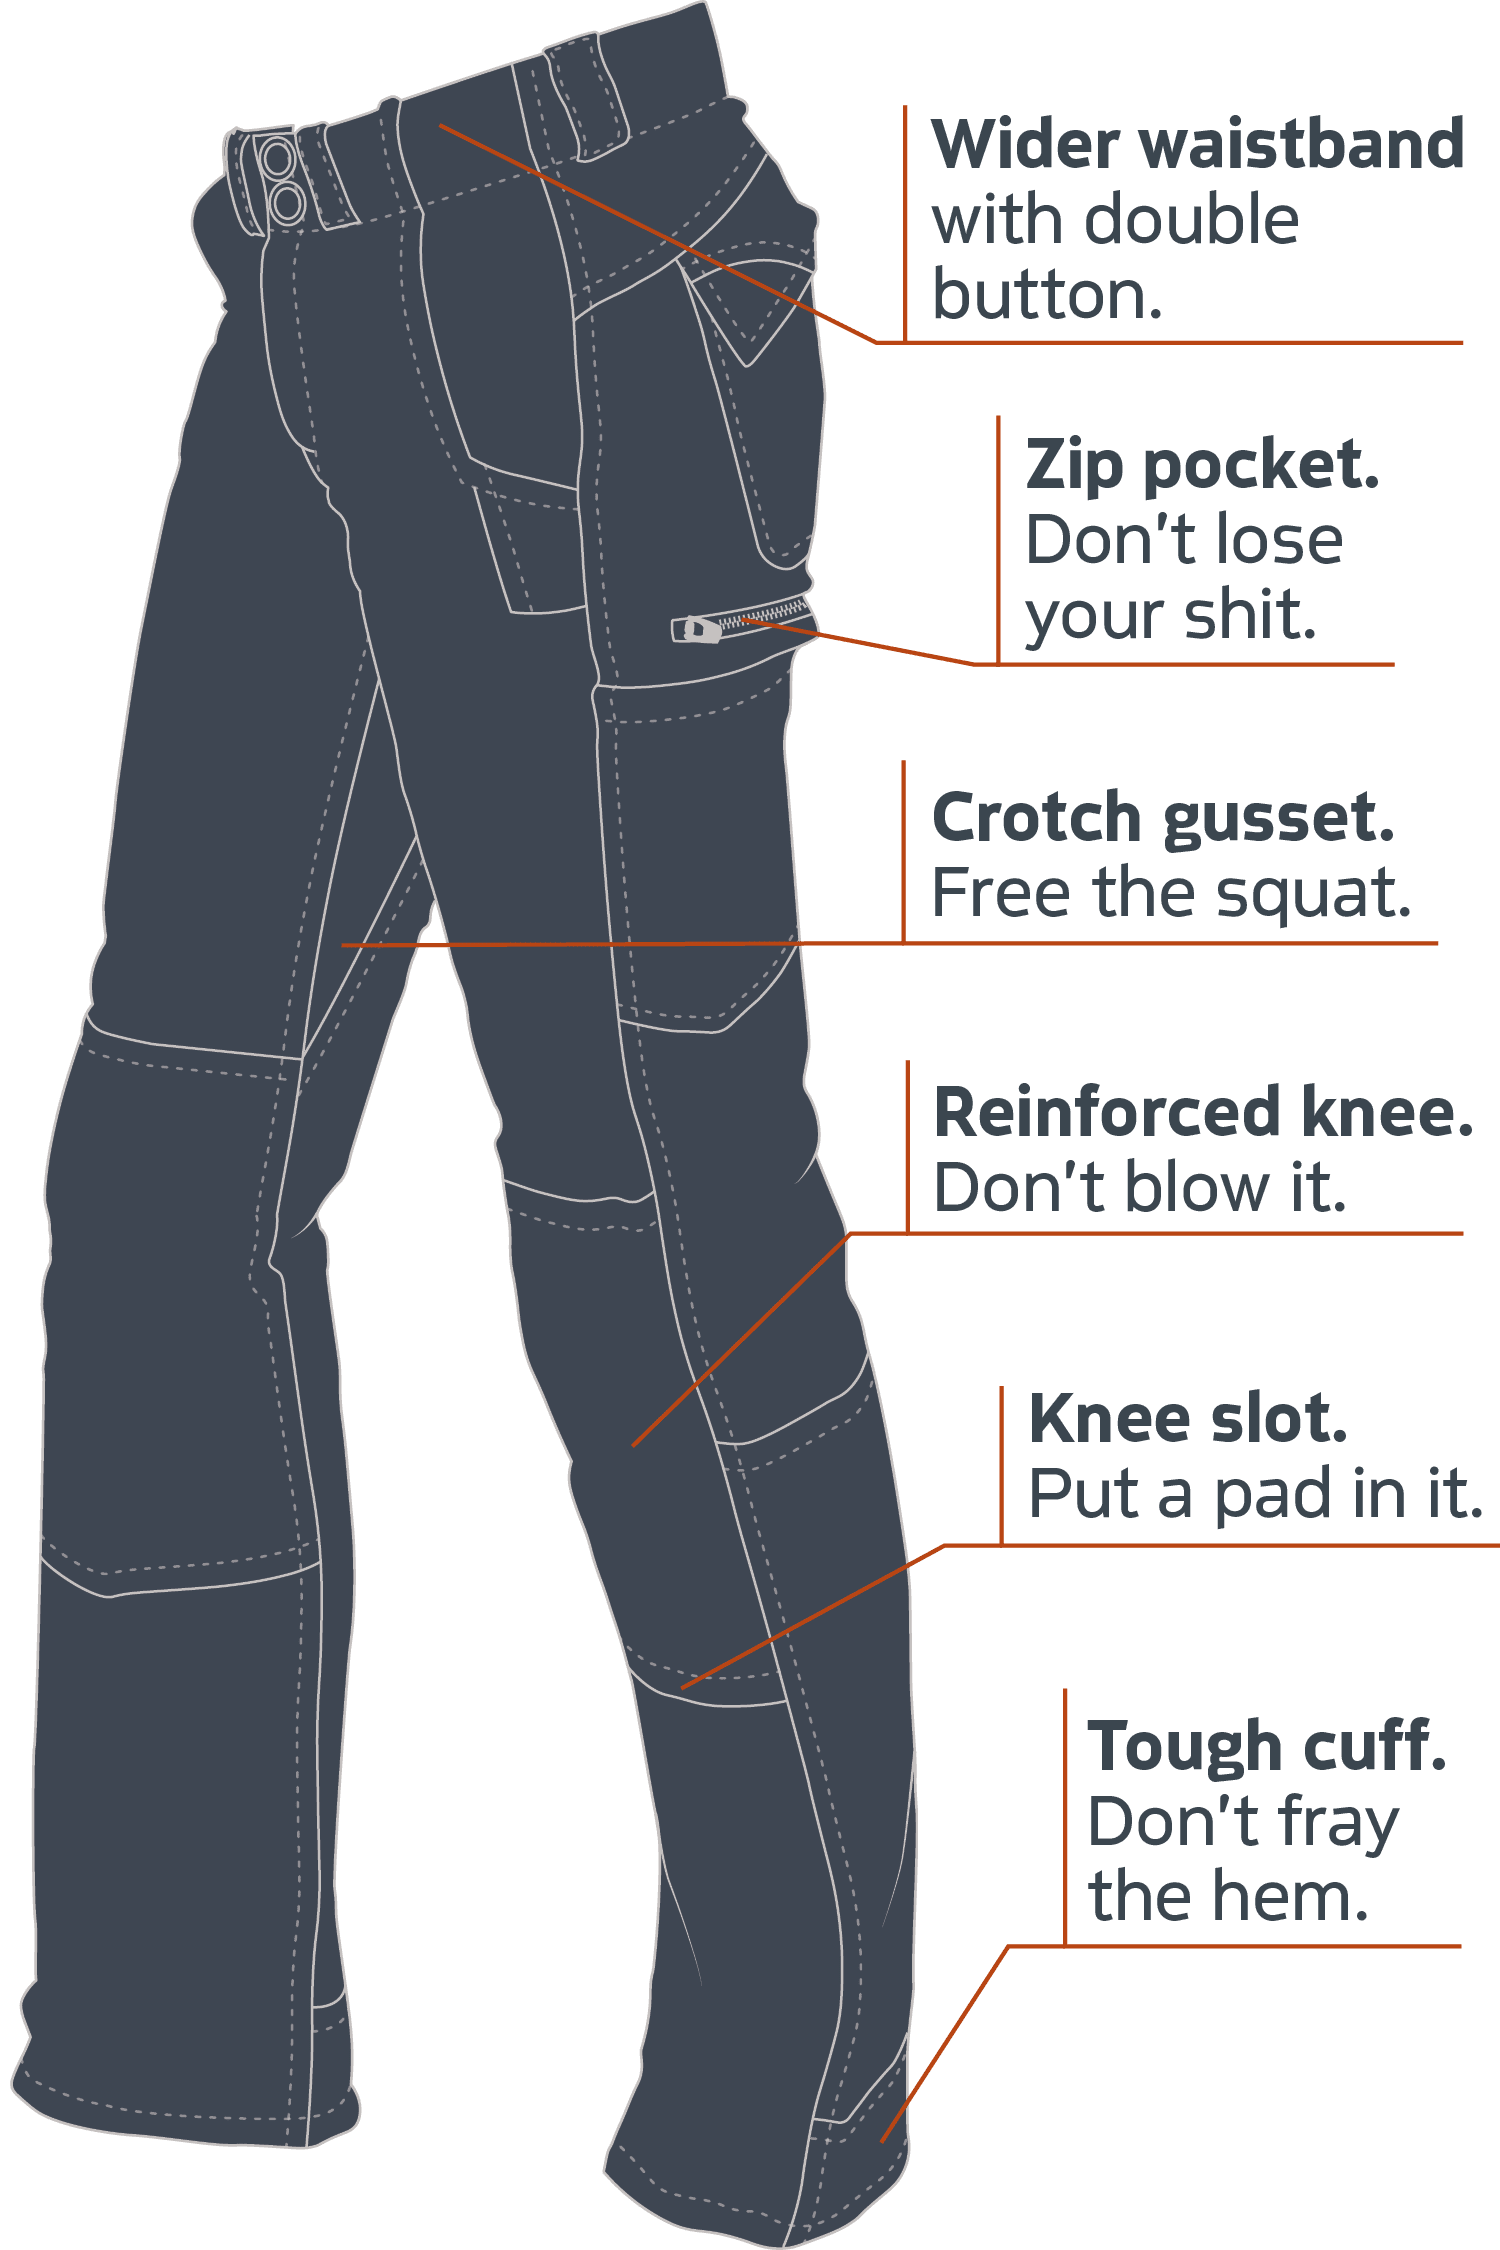 Britt X Graphic: 13 pockets, 2 tool loops, Zip pockets, Crotch Gusset, Reinforced knee, knee slot, and tough cuff.